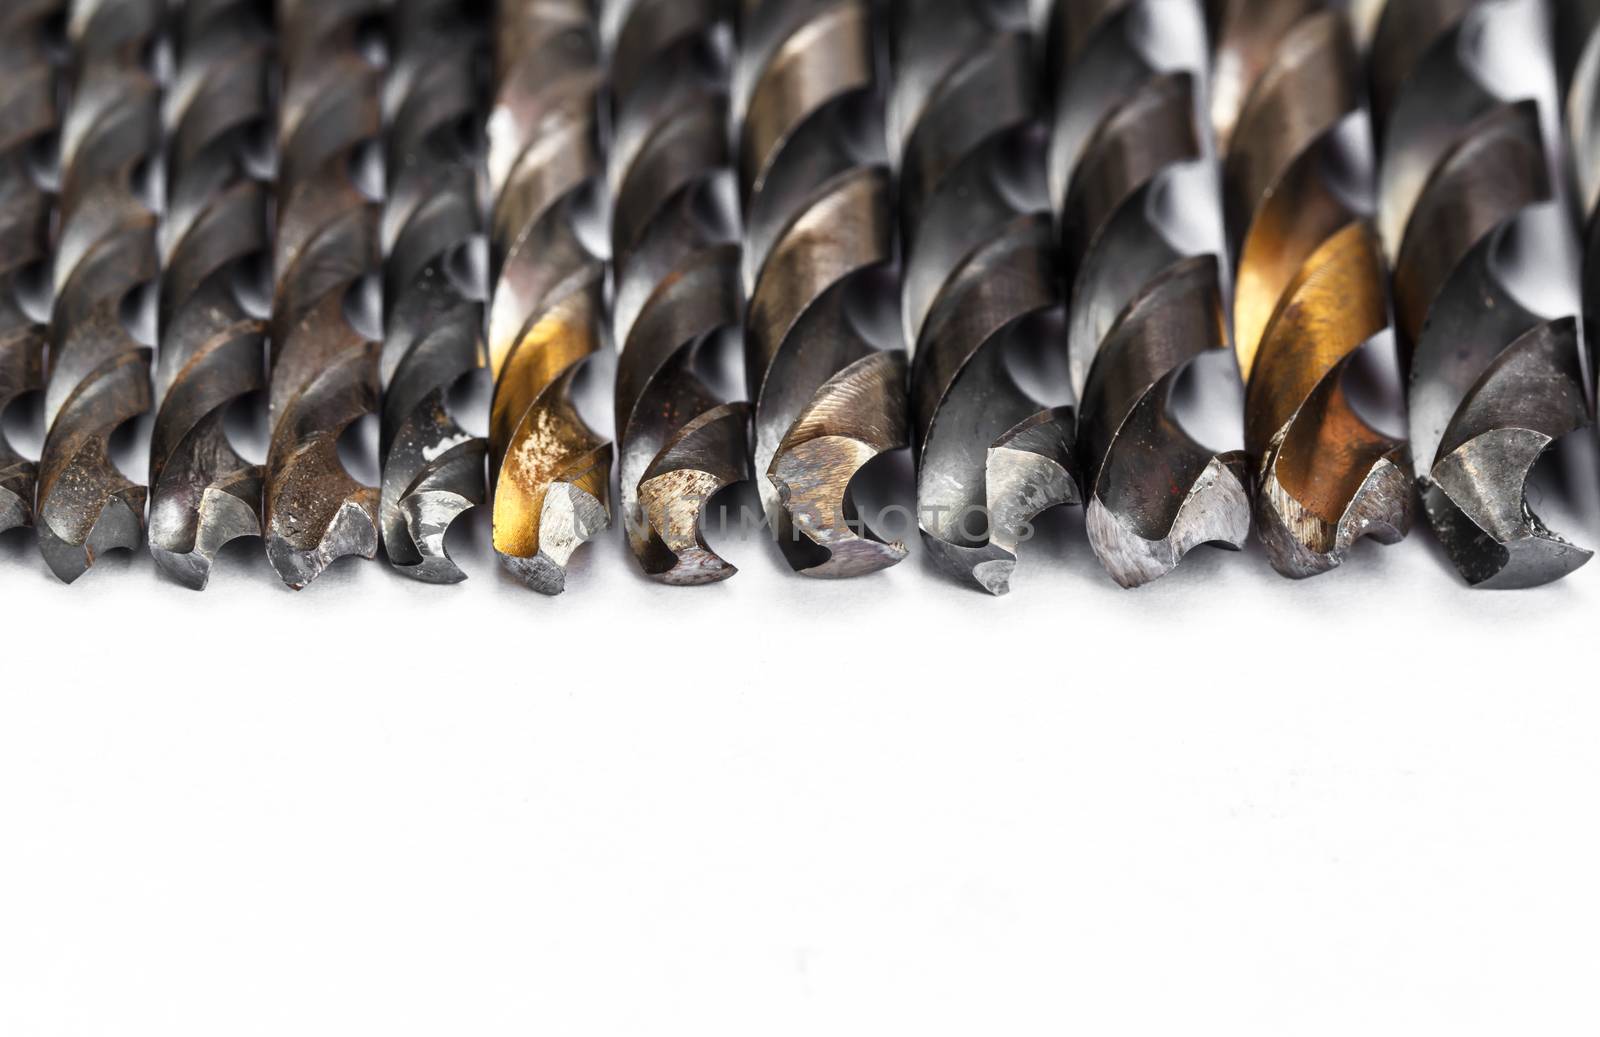 Various used twist drill bits in a row